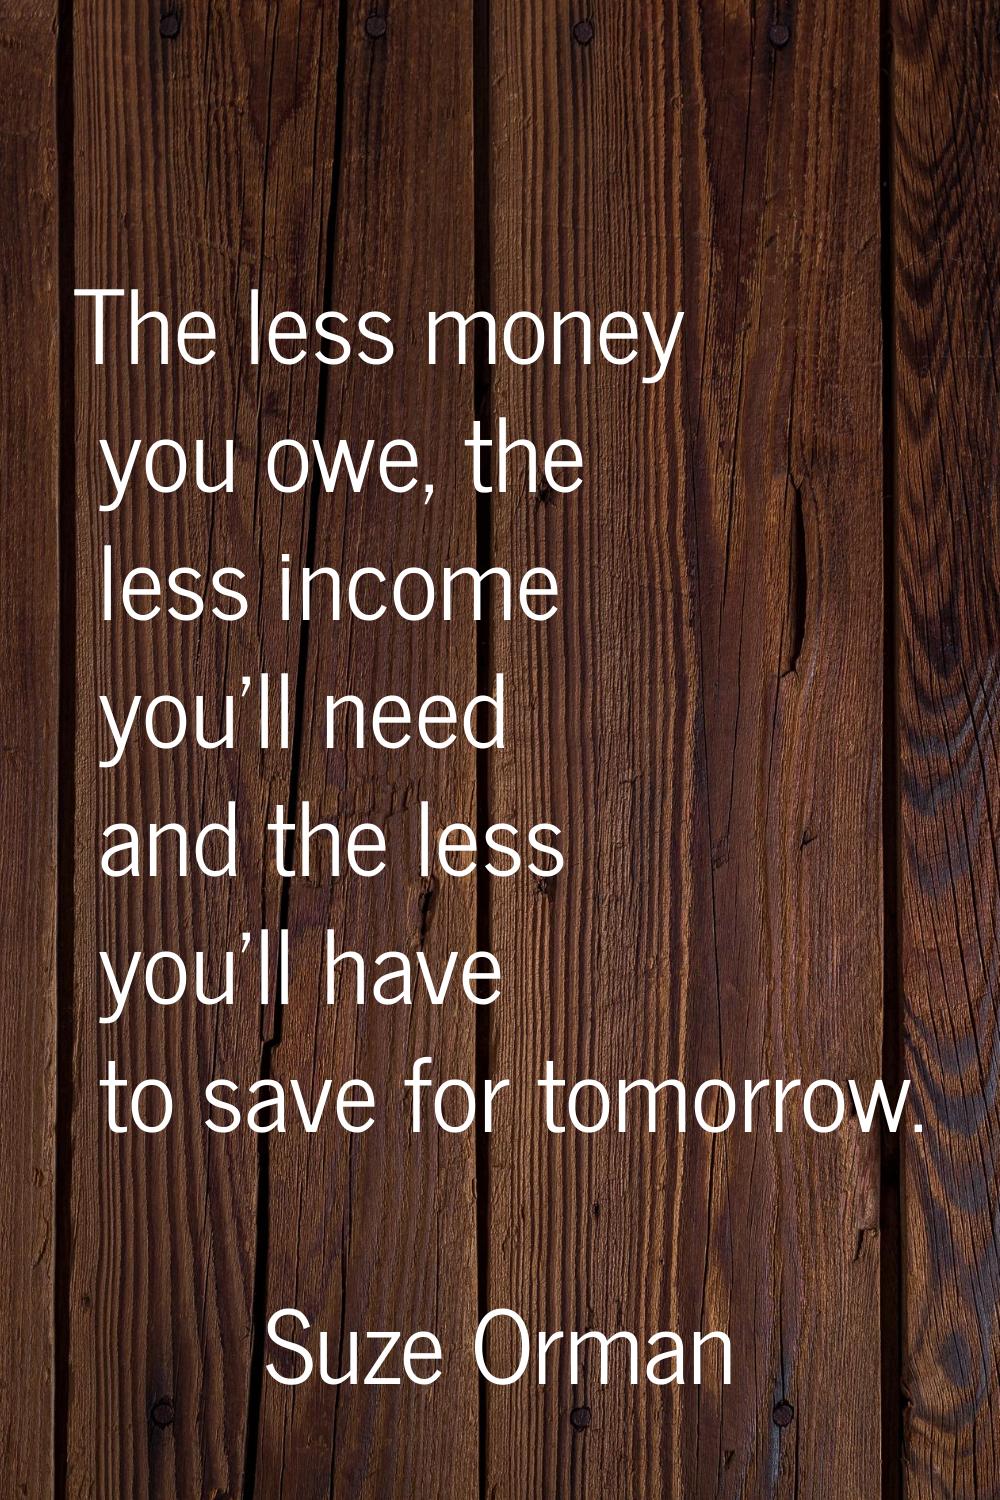 The less money you owe, the less income you'll need and the less you'll have to save for tomorrow.